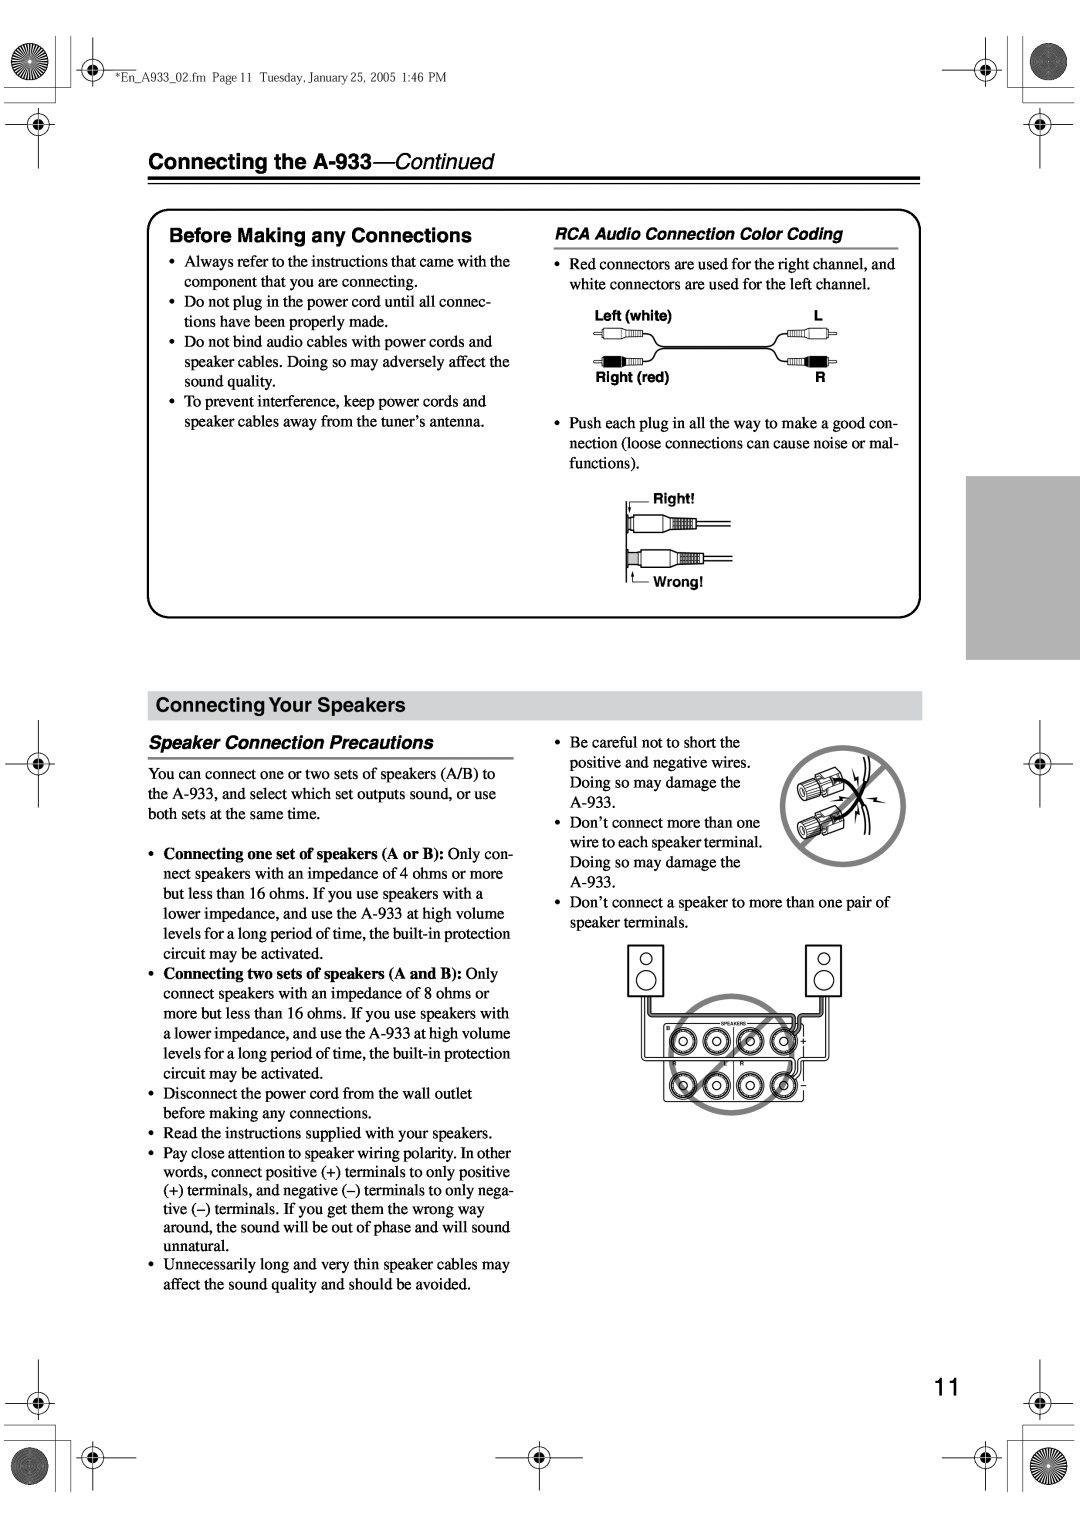 Onkyo instruction manual Connecting the A-933-Continued, Before Making any Connections, Connecting Your Speakers 